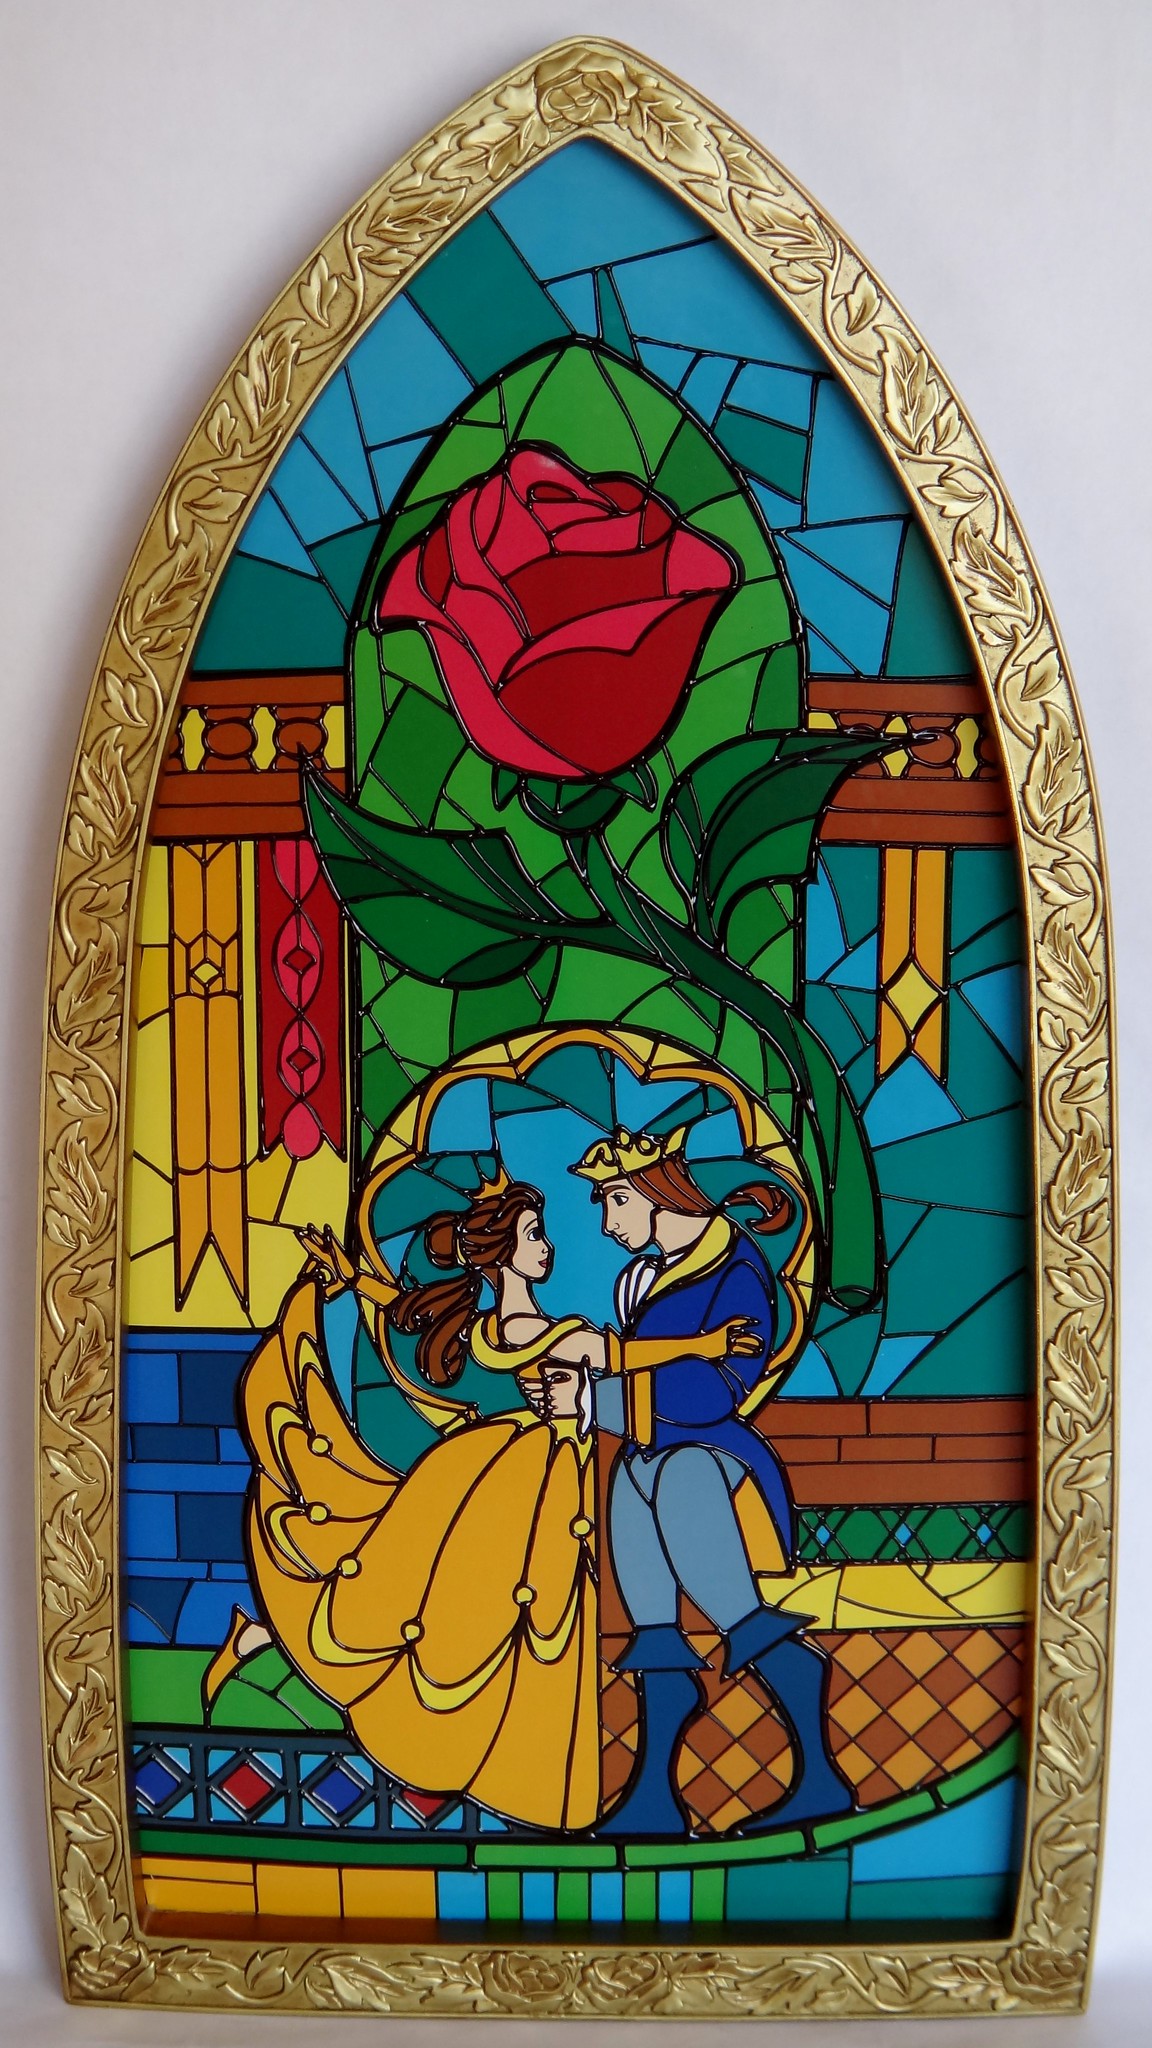 Beauty and the Beast Window Replica - Disney Store Purchase - First